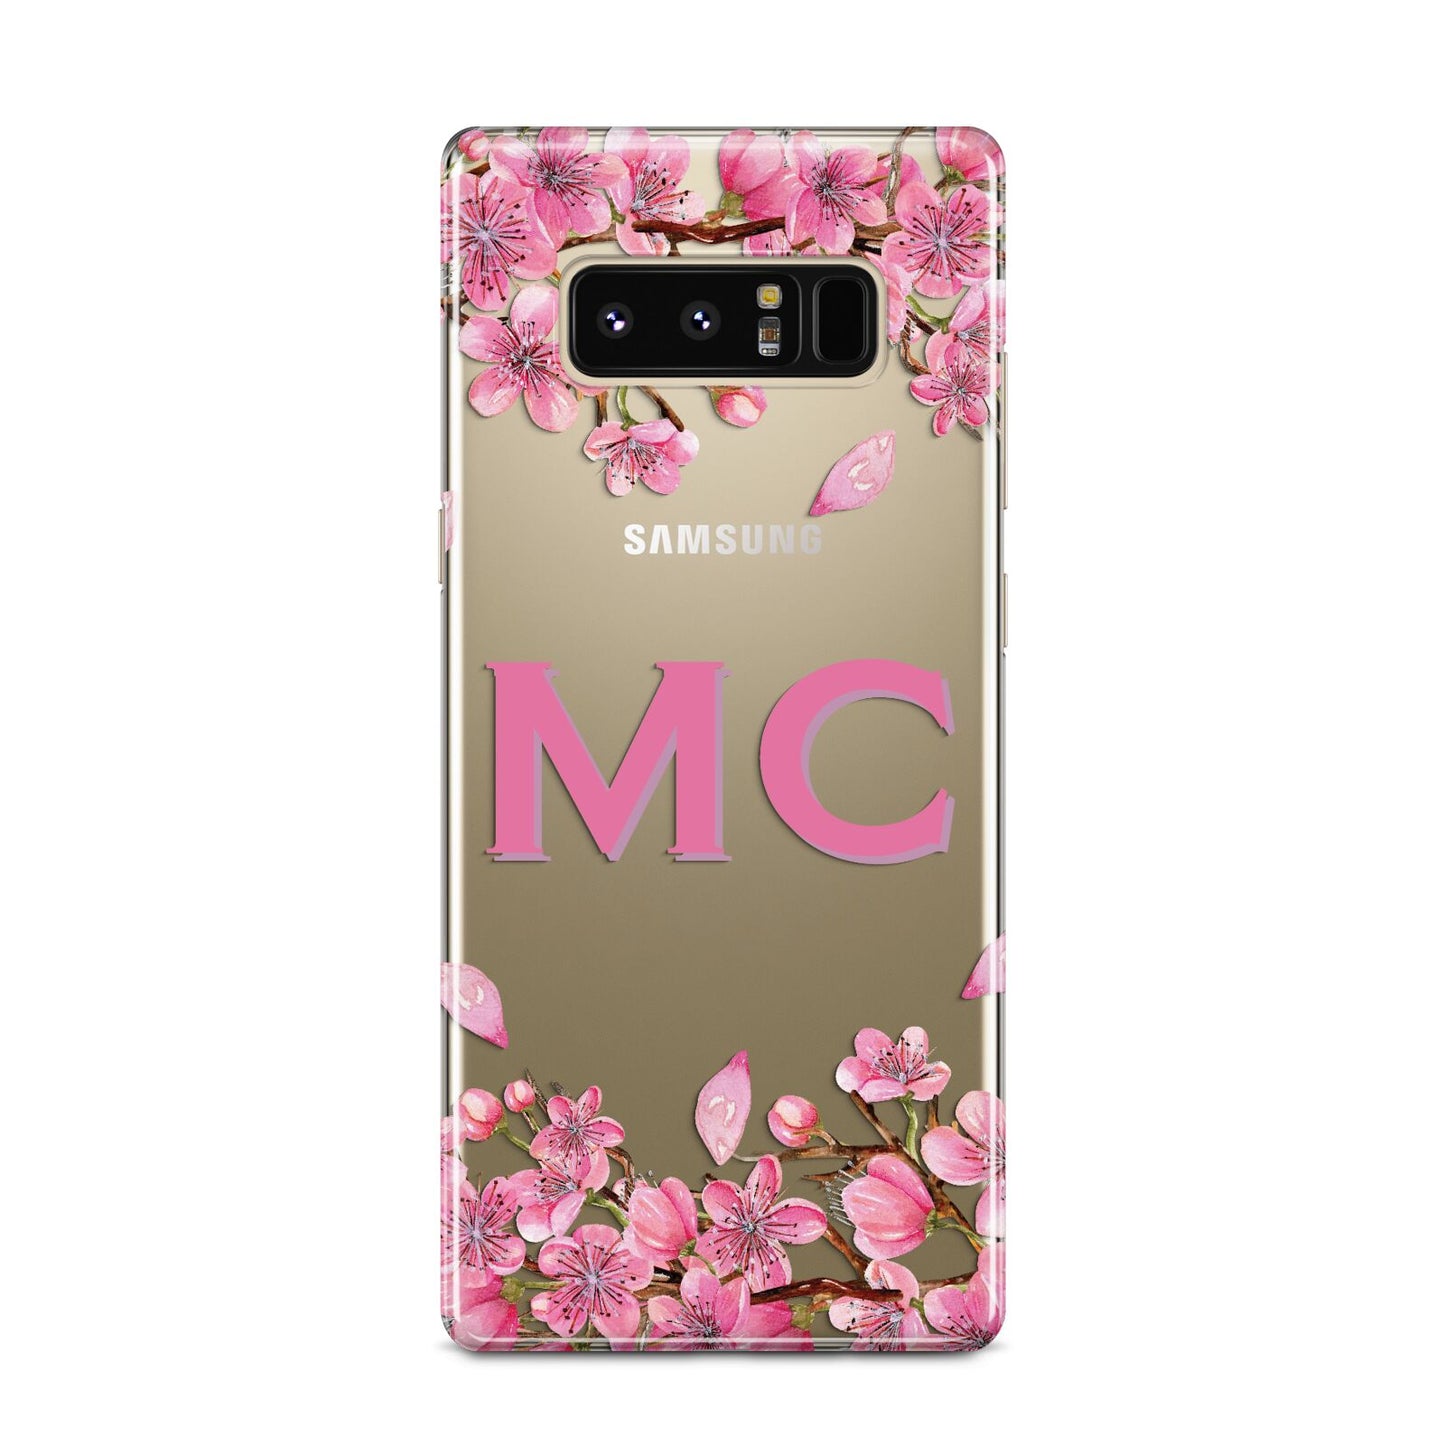 Personalised Vibrant Cherry Blossom Pink Samsung Galaxy Note 8 Case